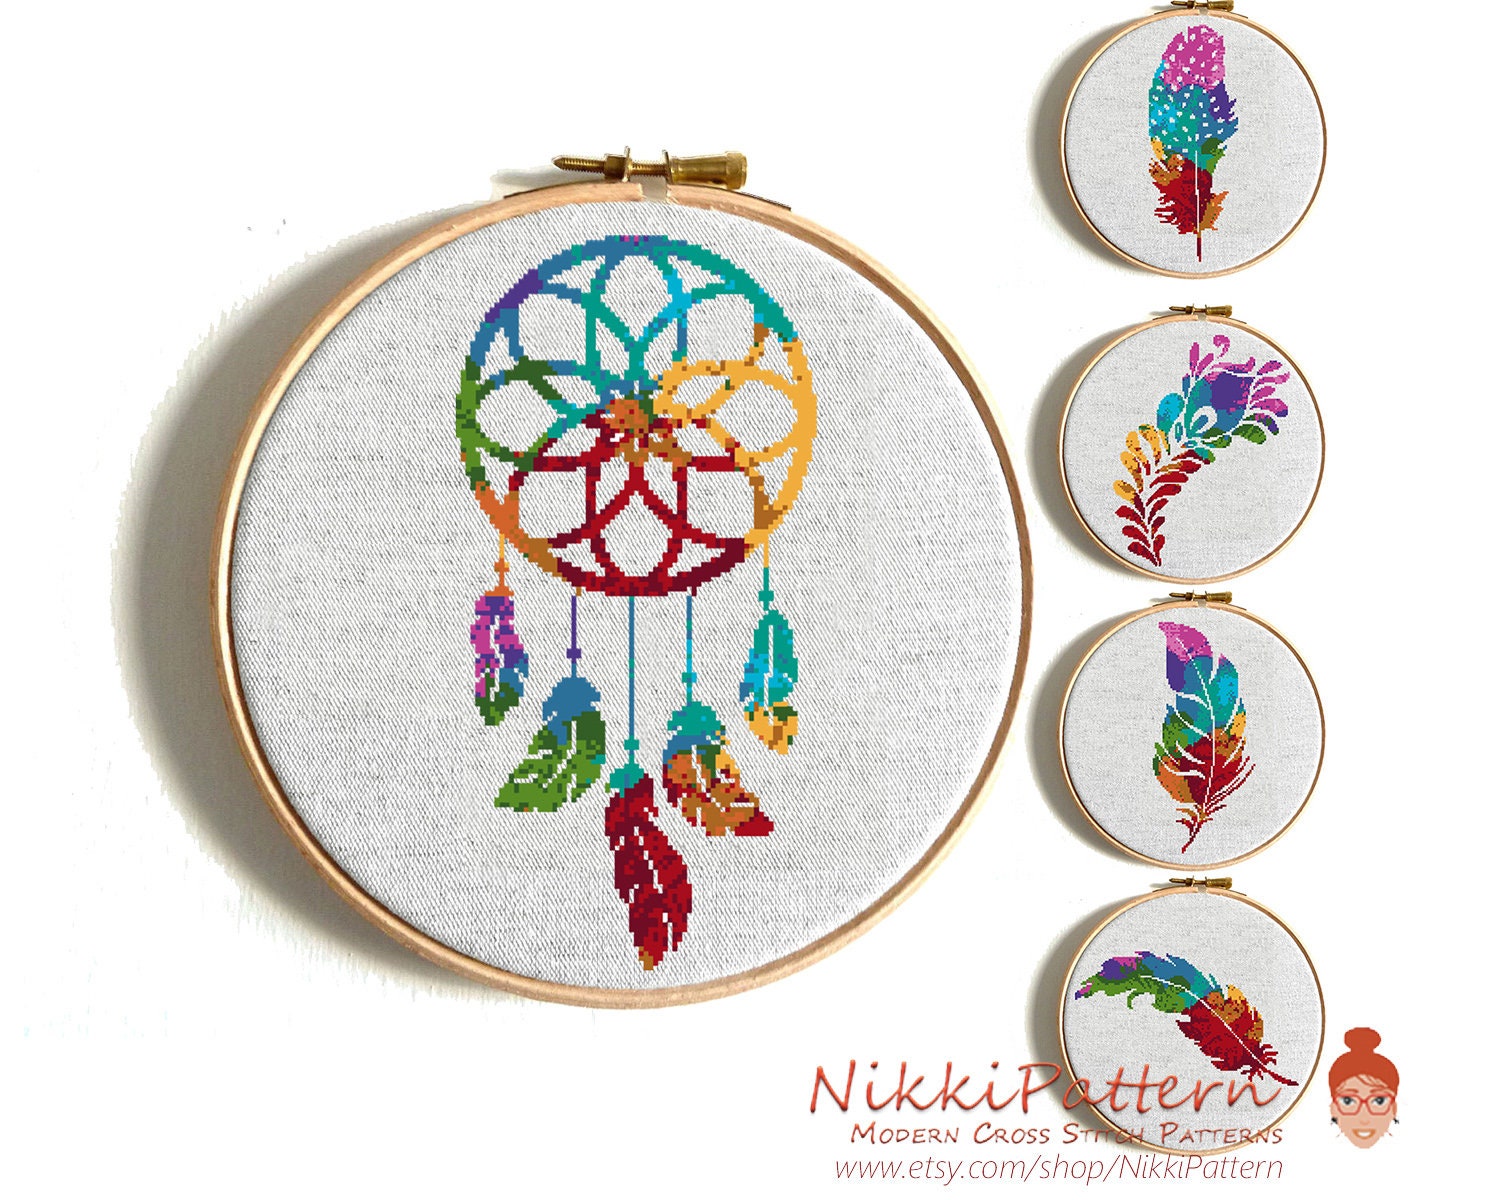 GIFTS FEATHERS HAND MADE IN MEXICO WHOLESALE SET OF 12 DREAMCATCHERS 6" 